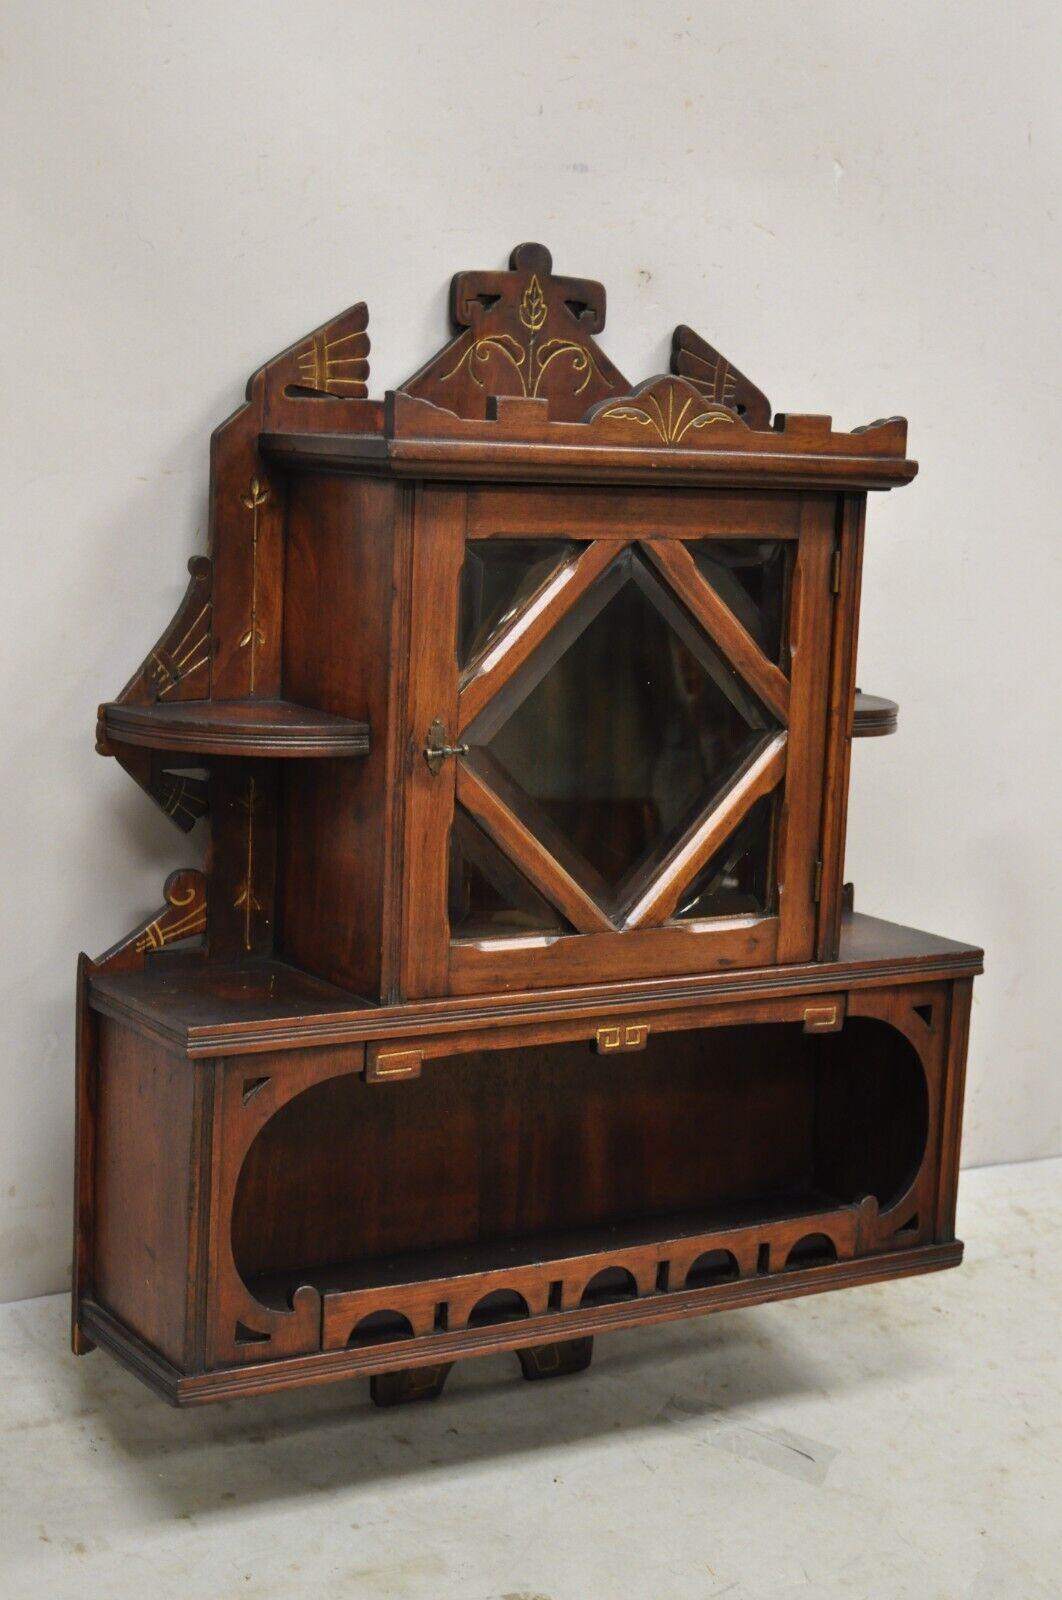 Antique Eastlake Victorian carved walnut wall display curio cabinet beveled glass door. Item features Beveled glass, lower interior shelf, beautiful wood grain, nicely carved details 1 swing door, very nice antique item, quality American